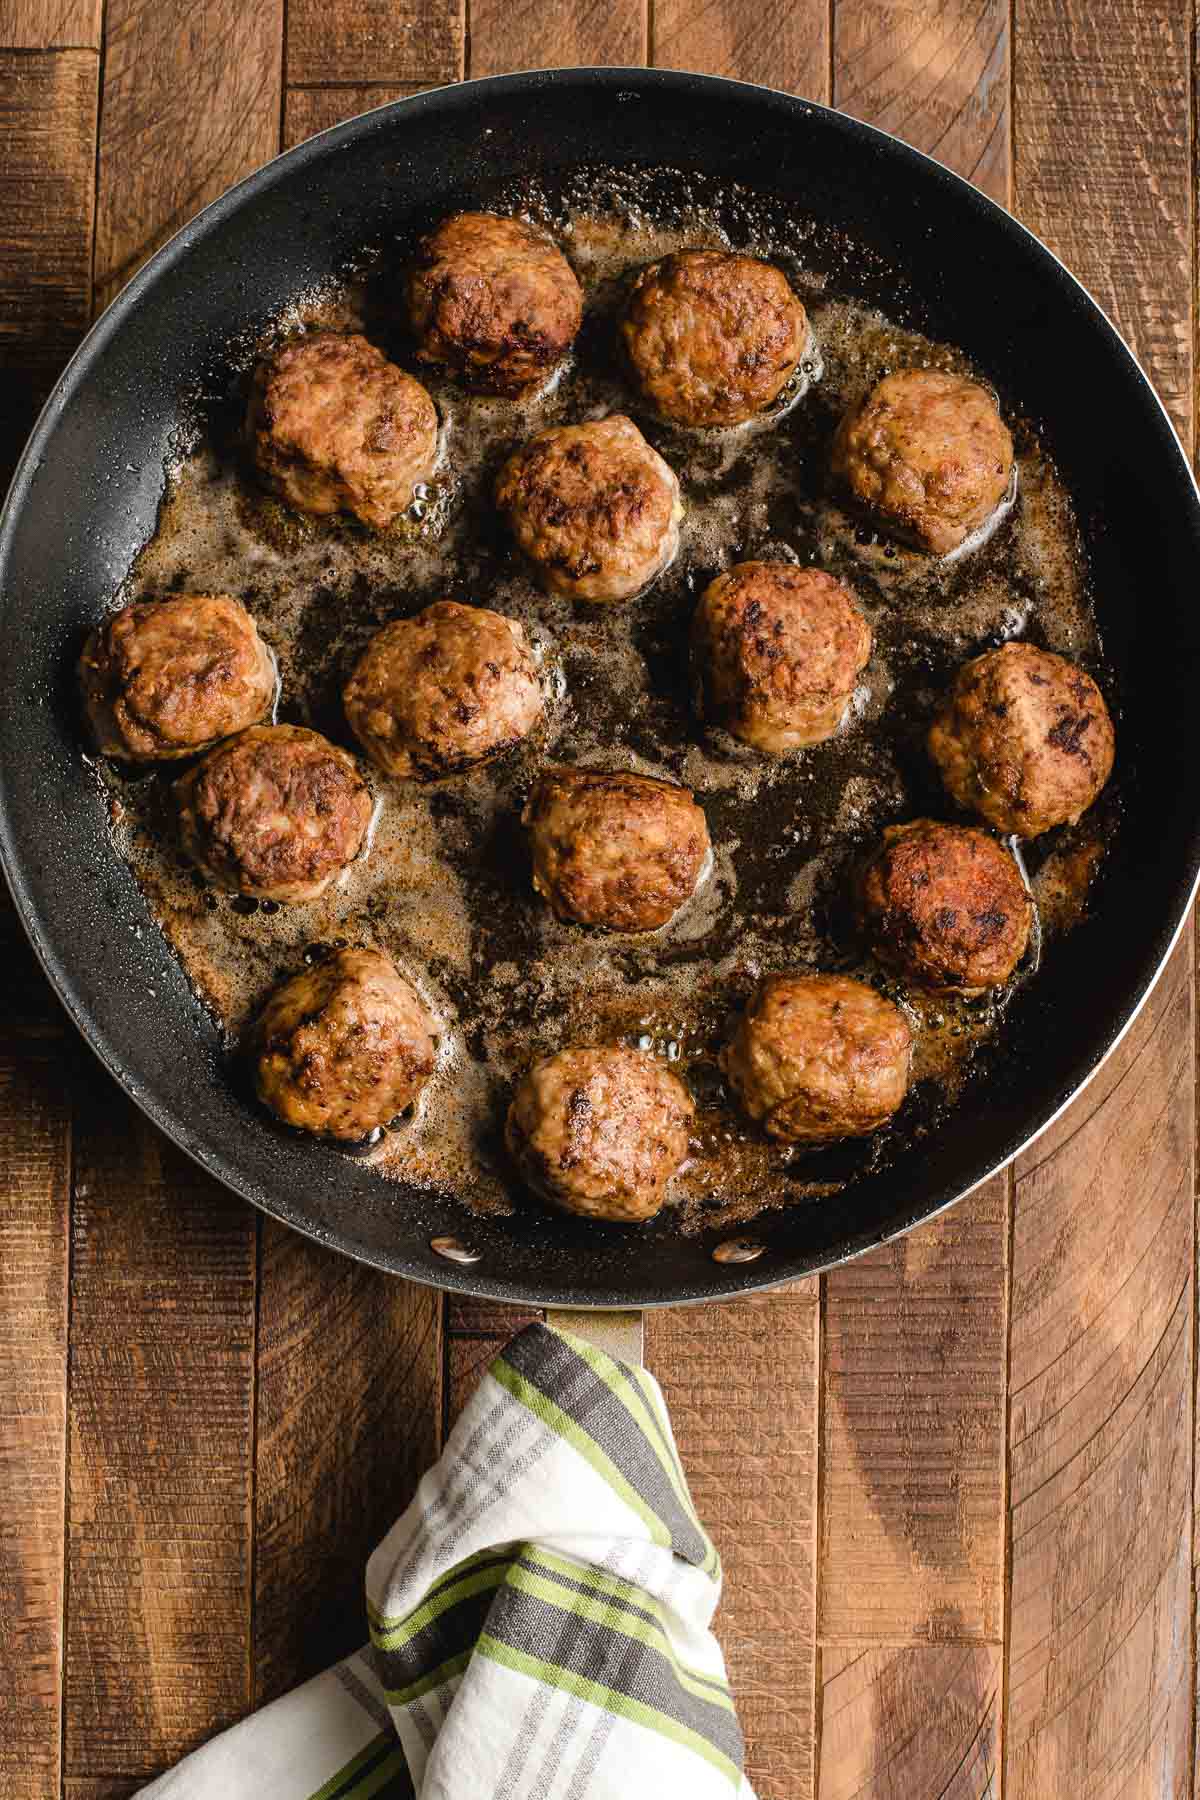 Meatballs frying in a cast iron skillet.